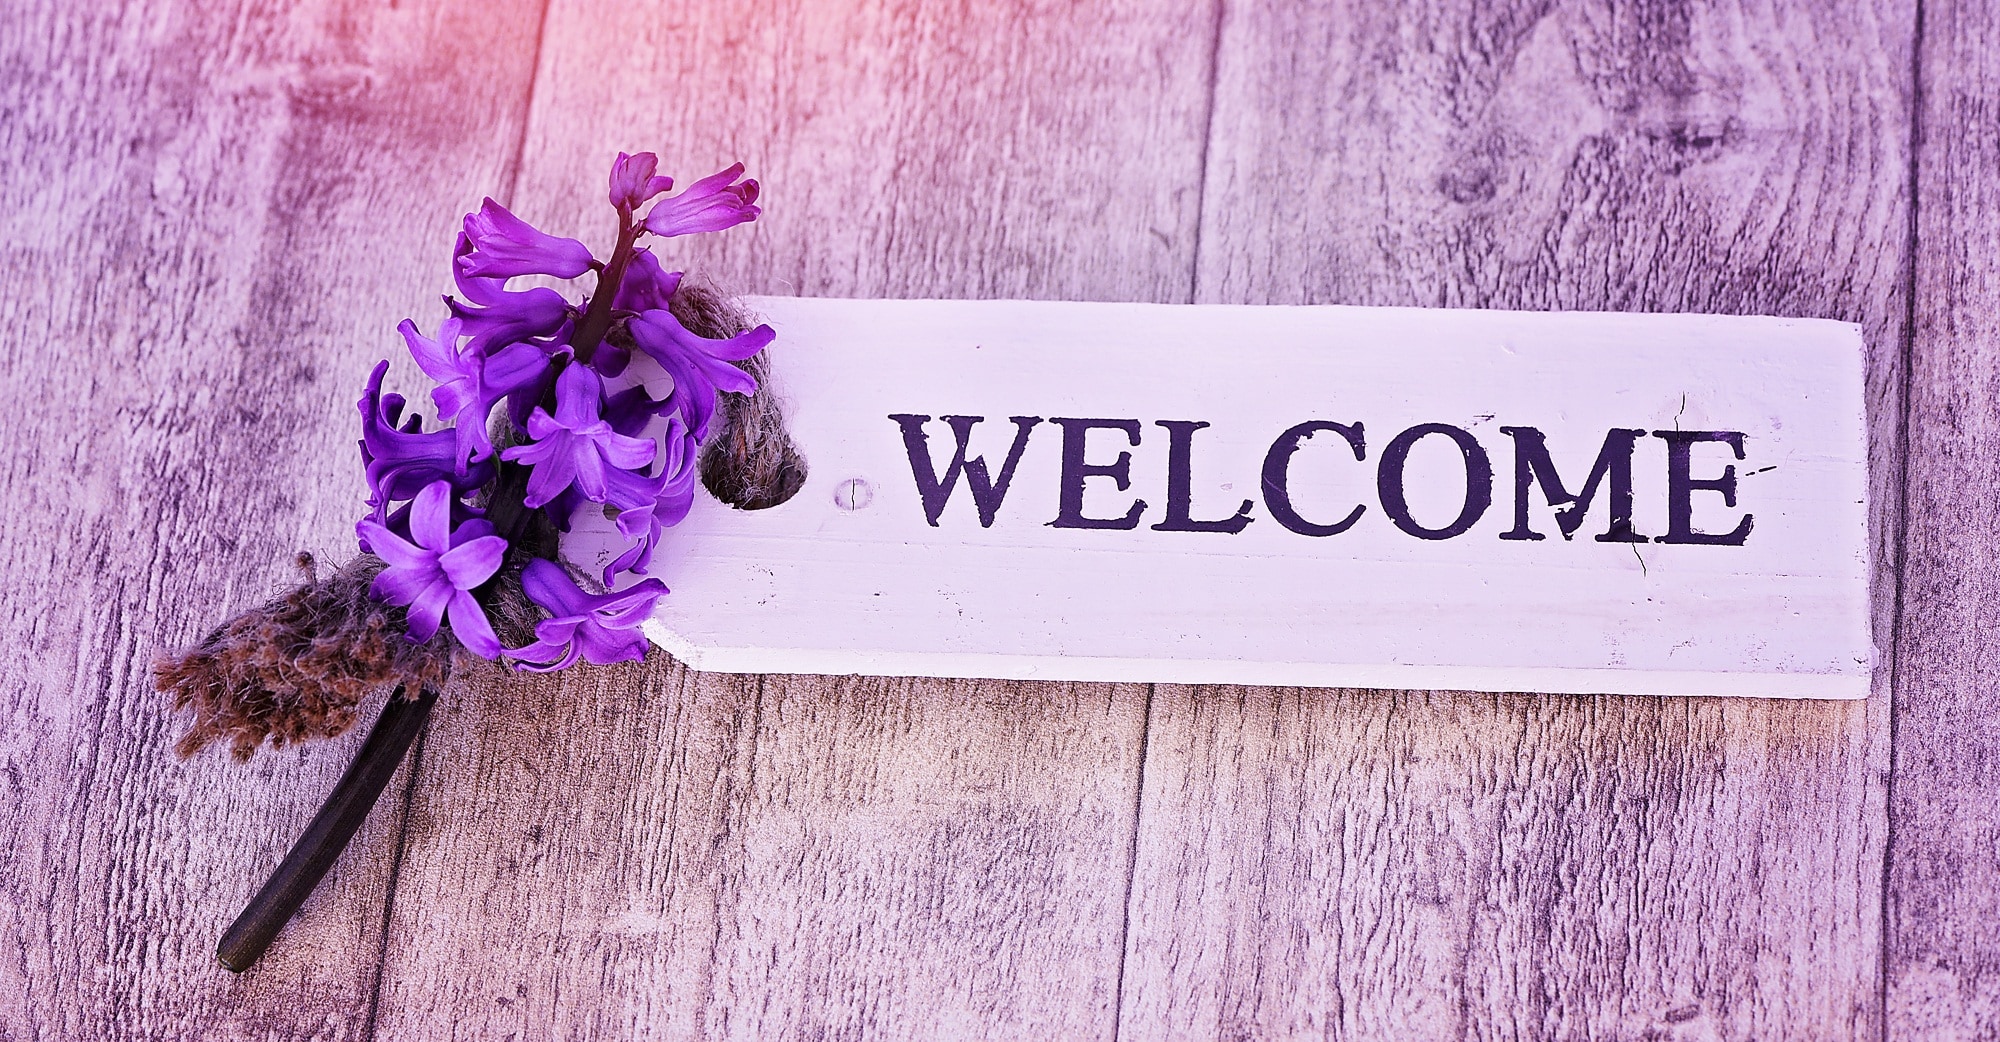 welcome with purple flower signage